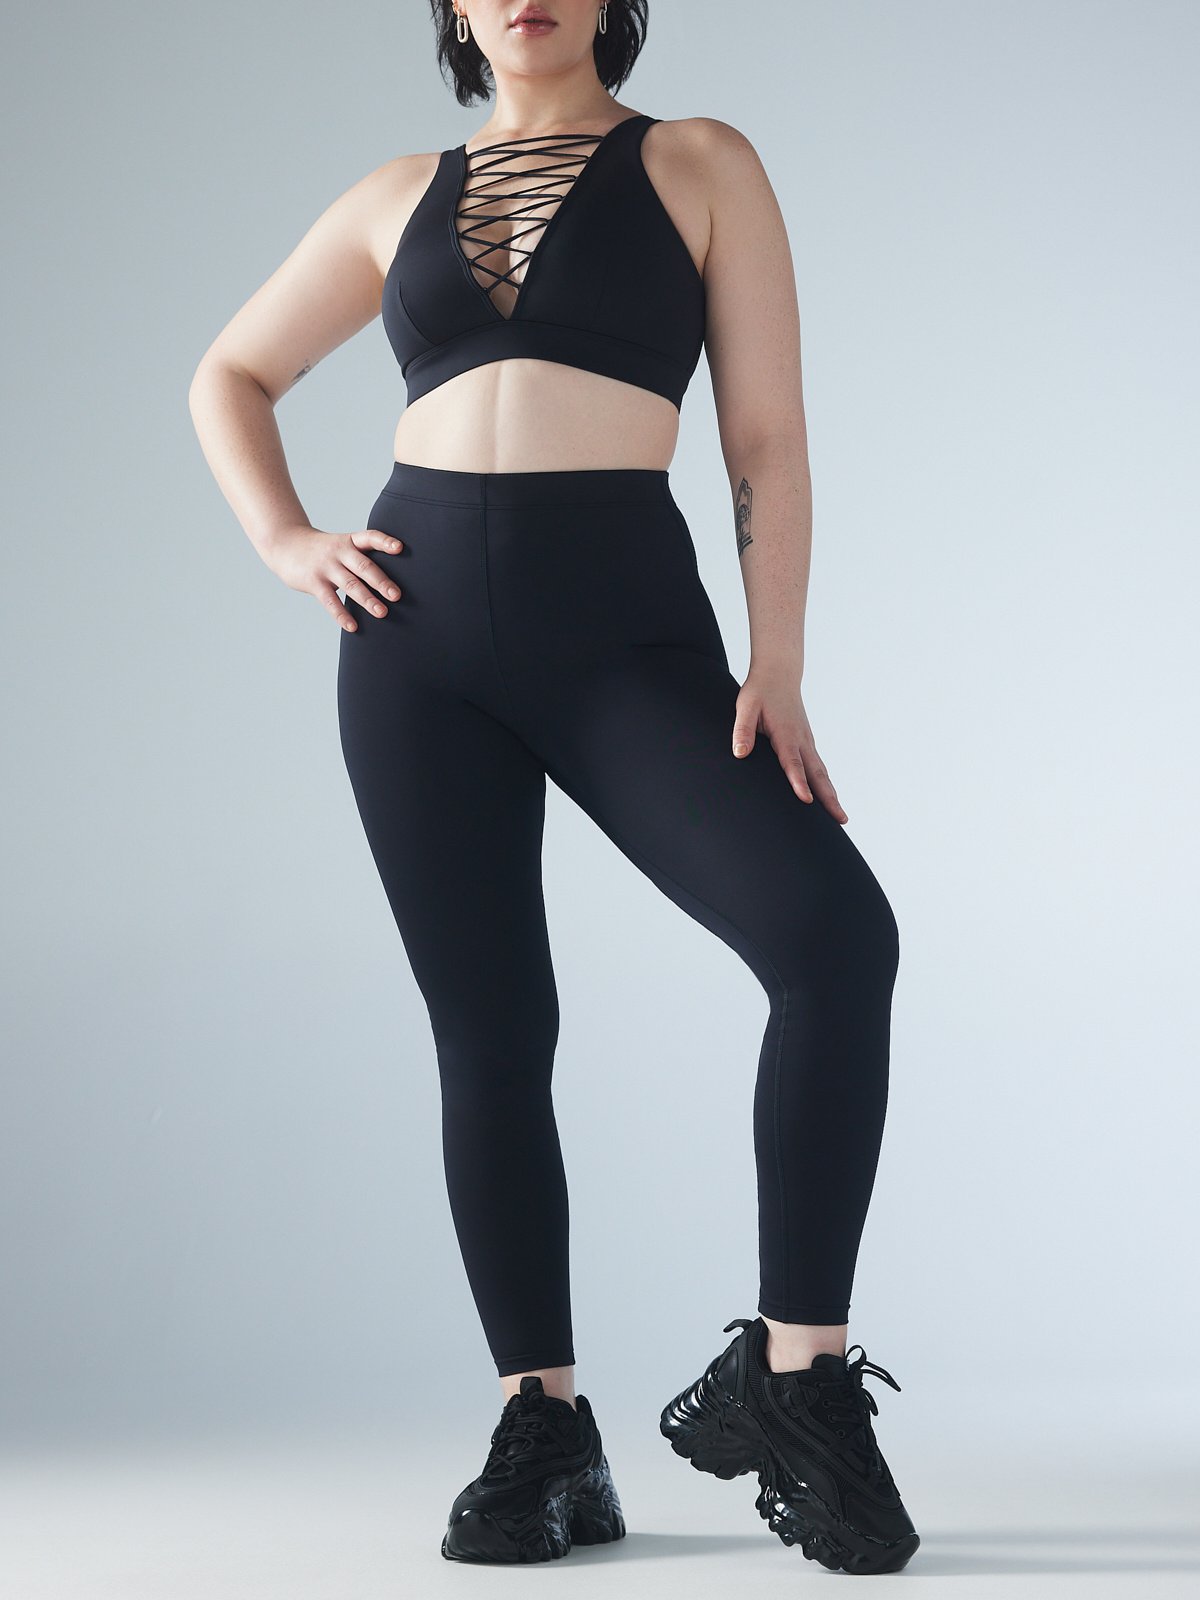 Lace Up High-Waist Leggings in Black